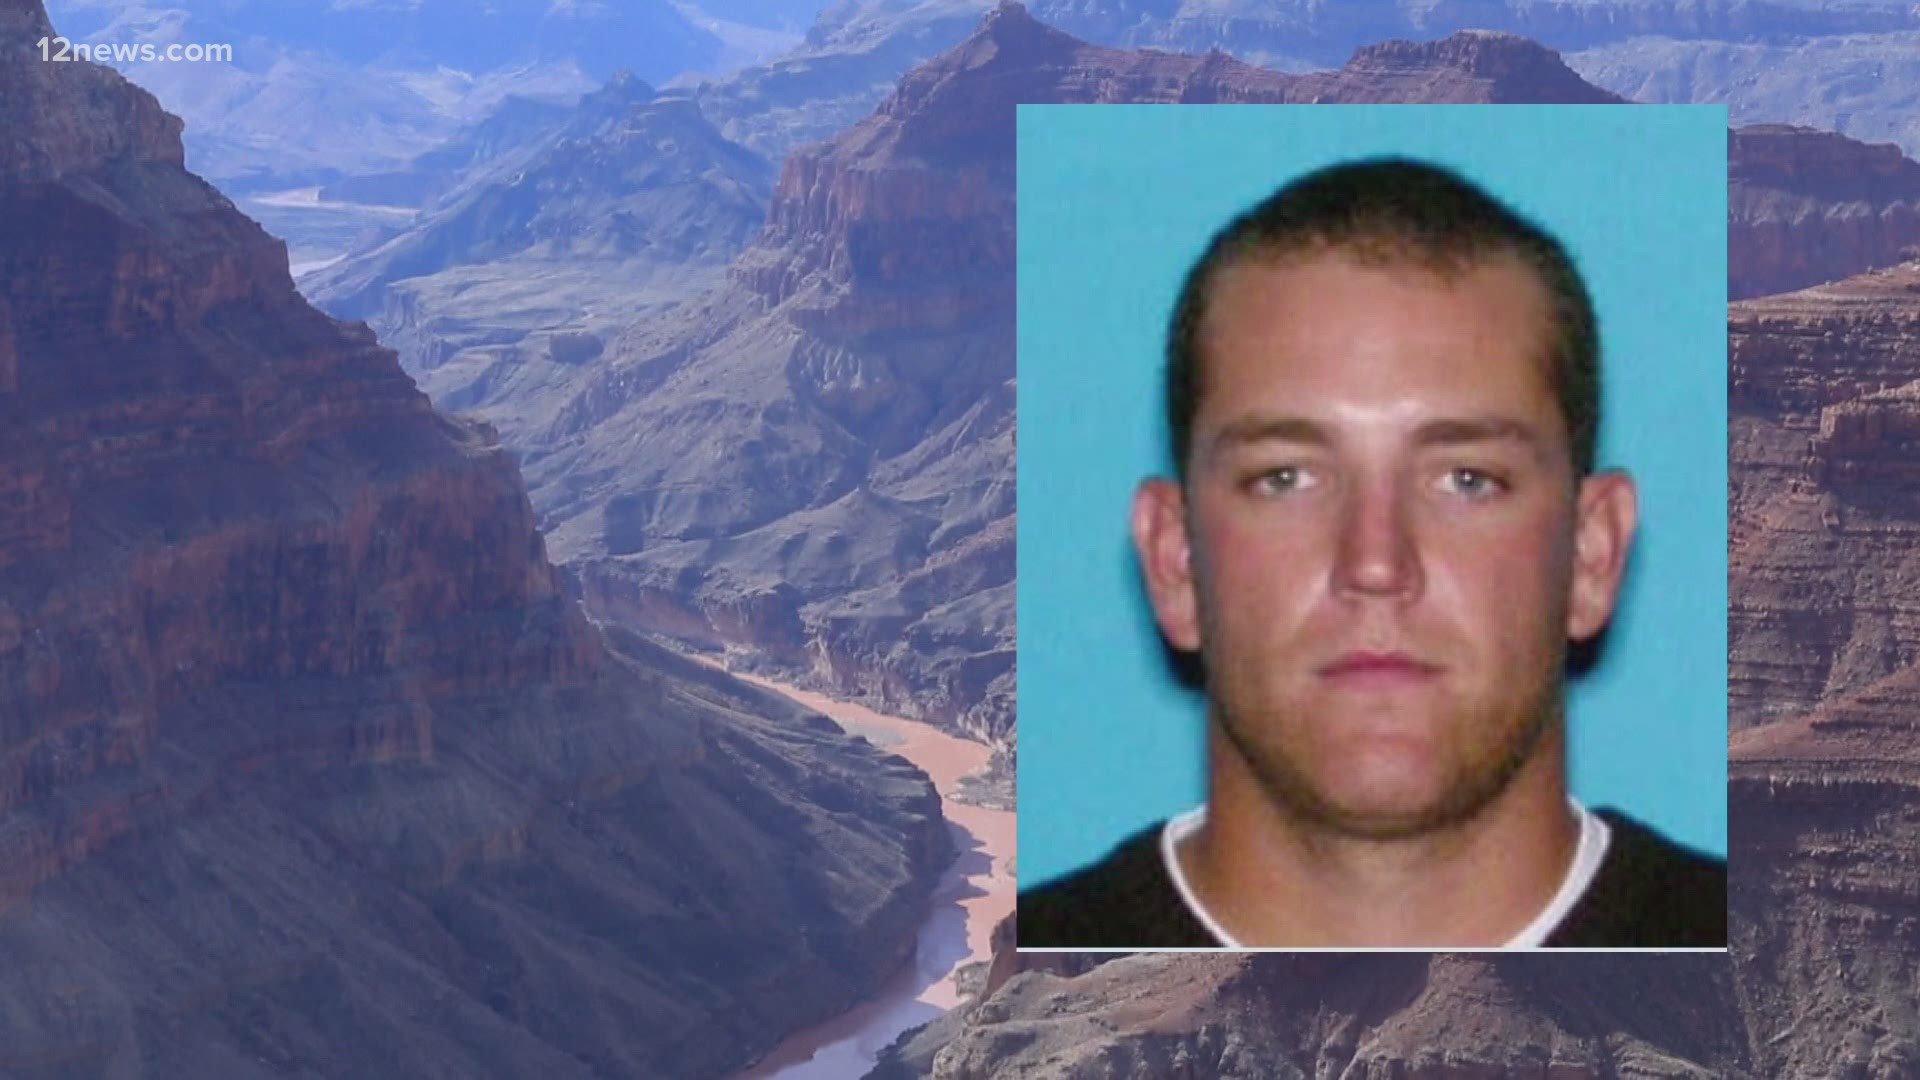 Charles Haeger was found dead at the Grand Canyon after allegedly shooting and killing his ex-girlfriend. The investigation is ongoing.